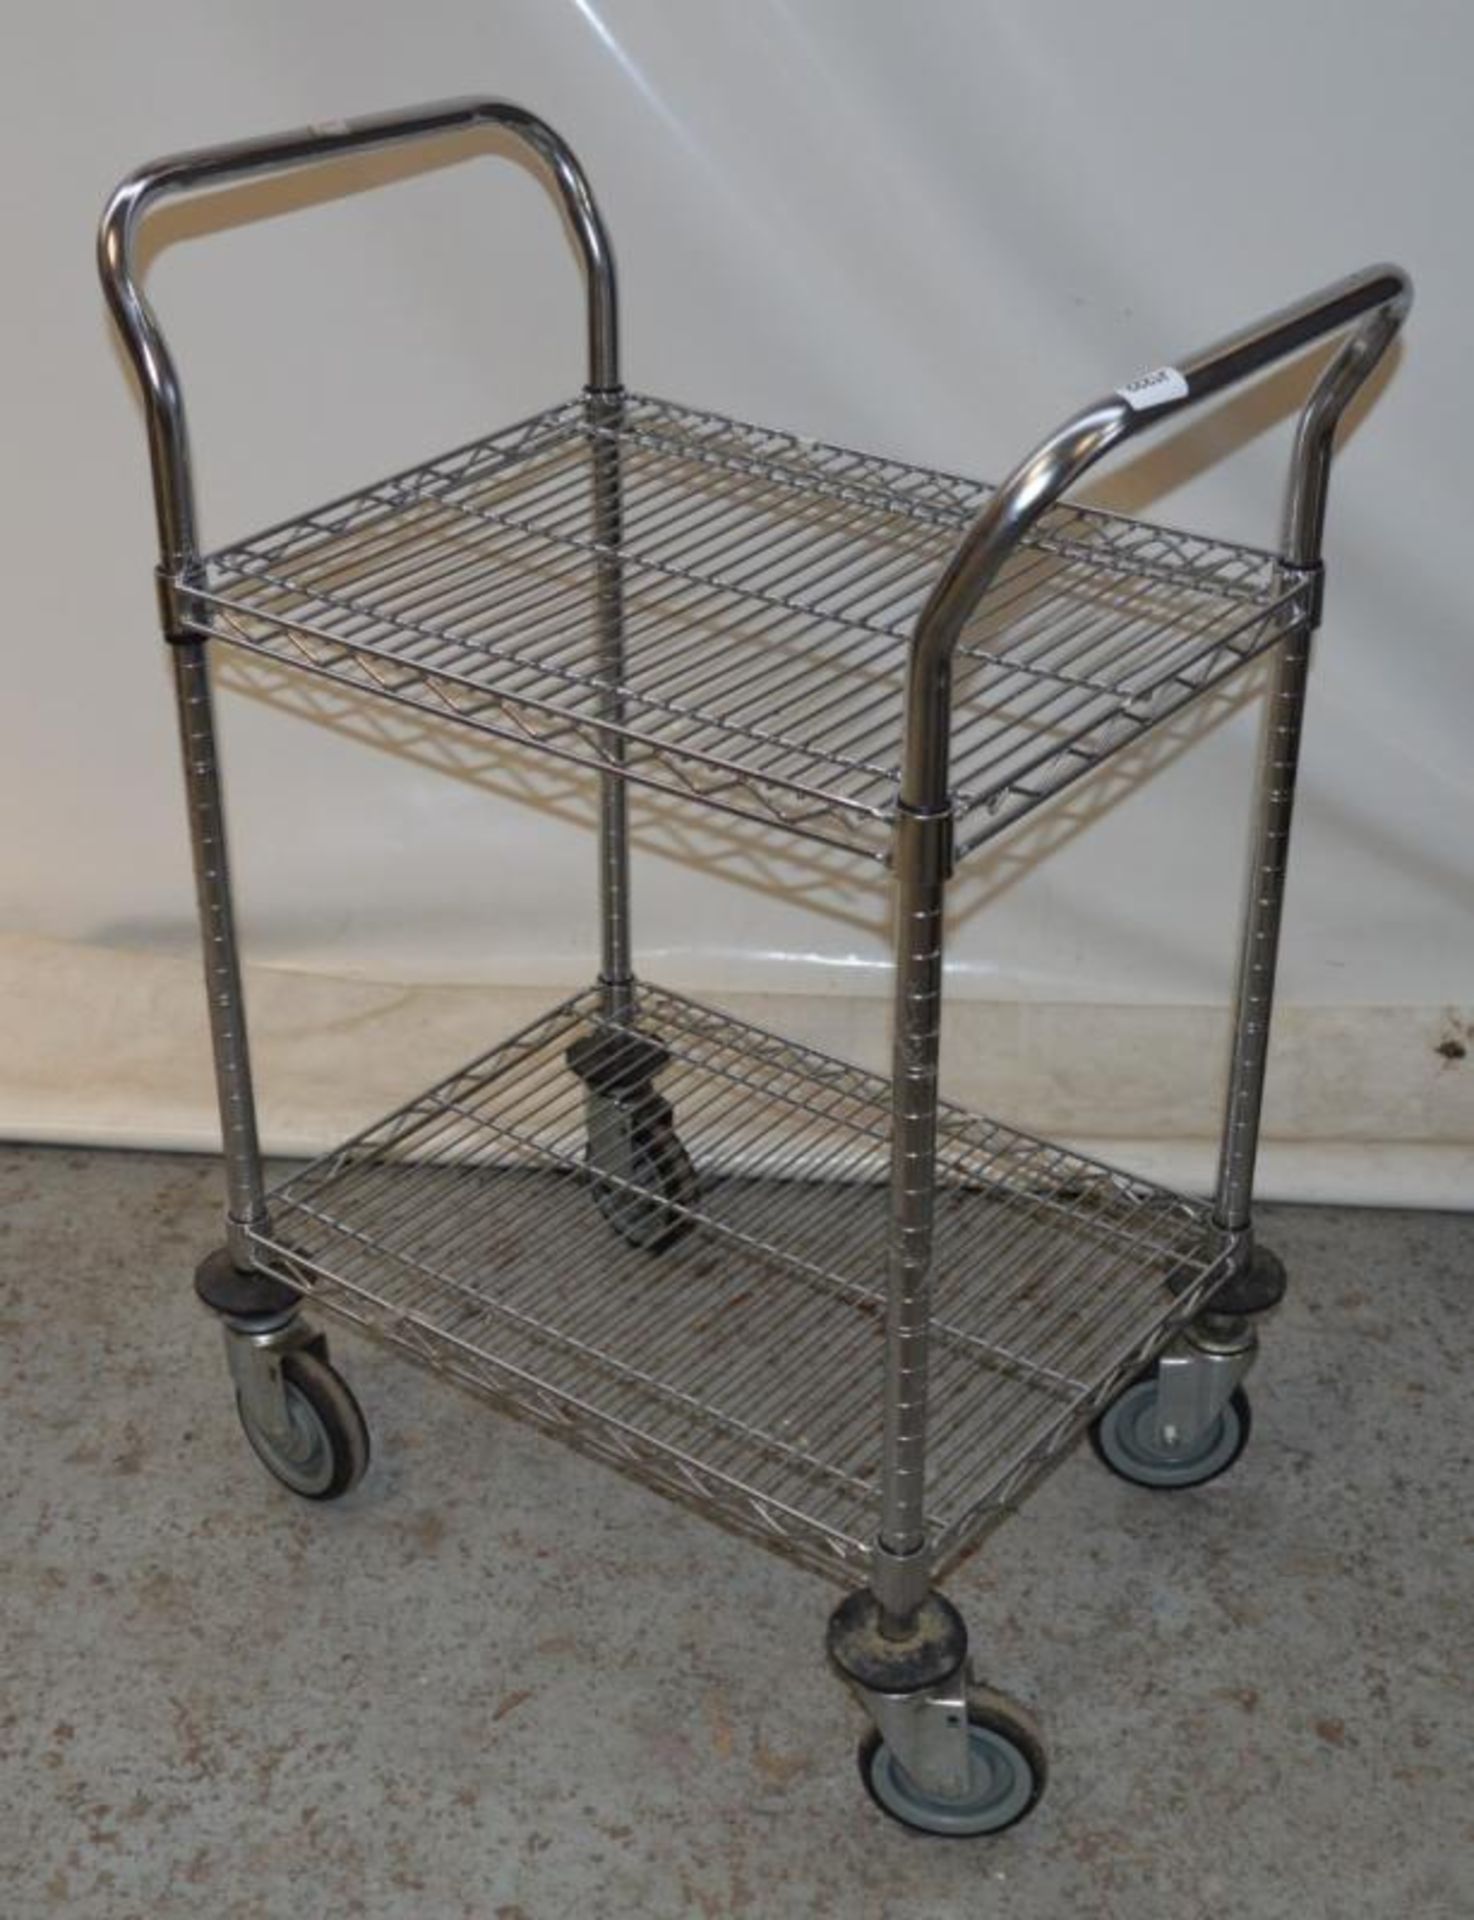 1 x Stainless Steel Commercial Wire Trolley on Castors - H99 x W71 x D46 cms - CL282 - Ref J1222 - L - Image 2 of 3